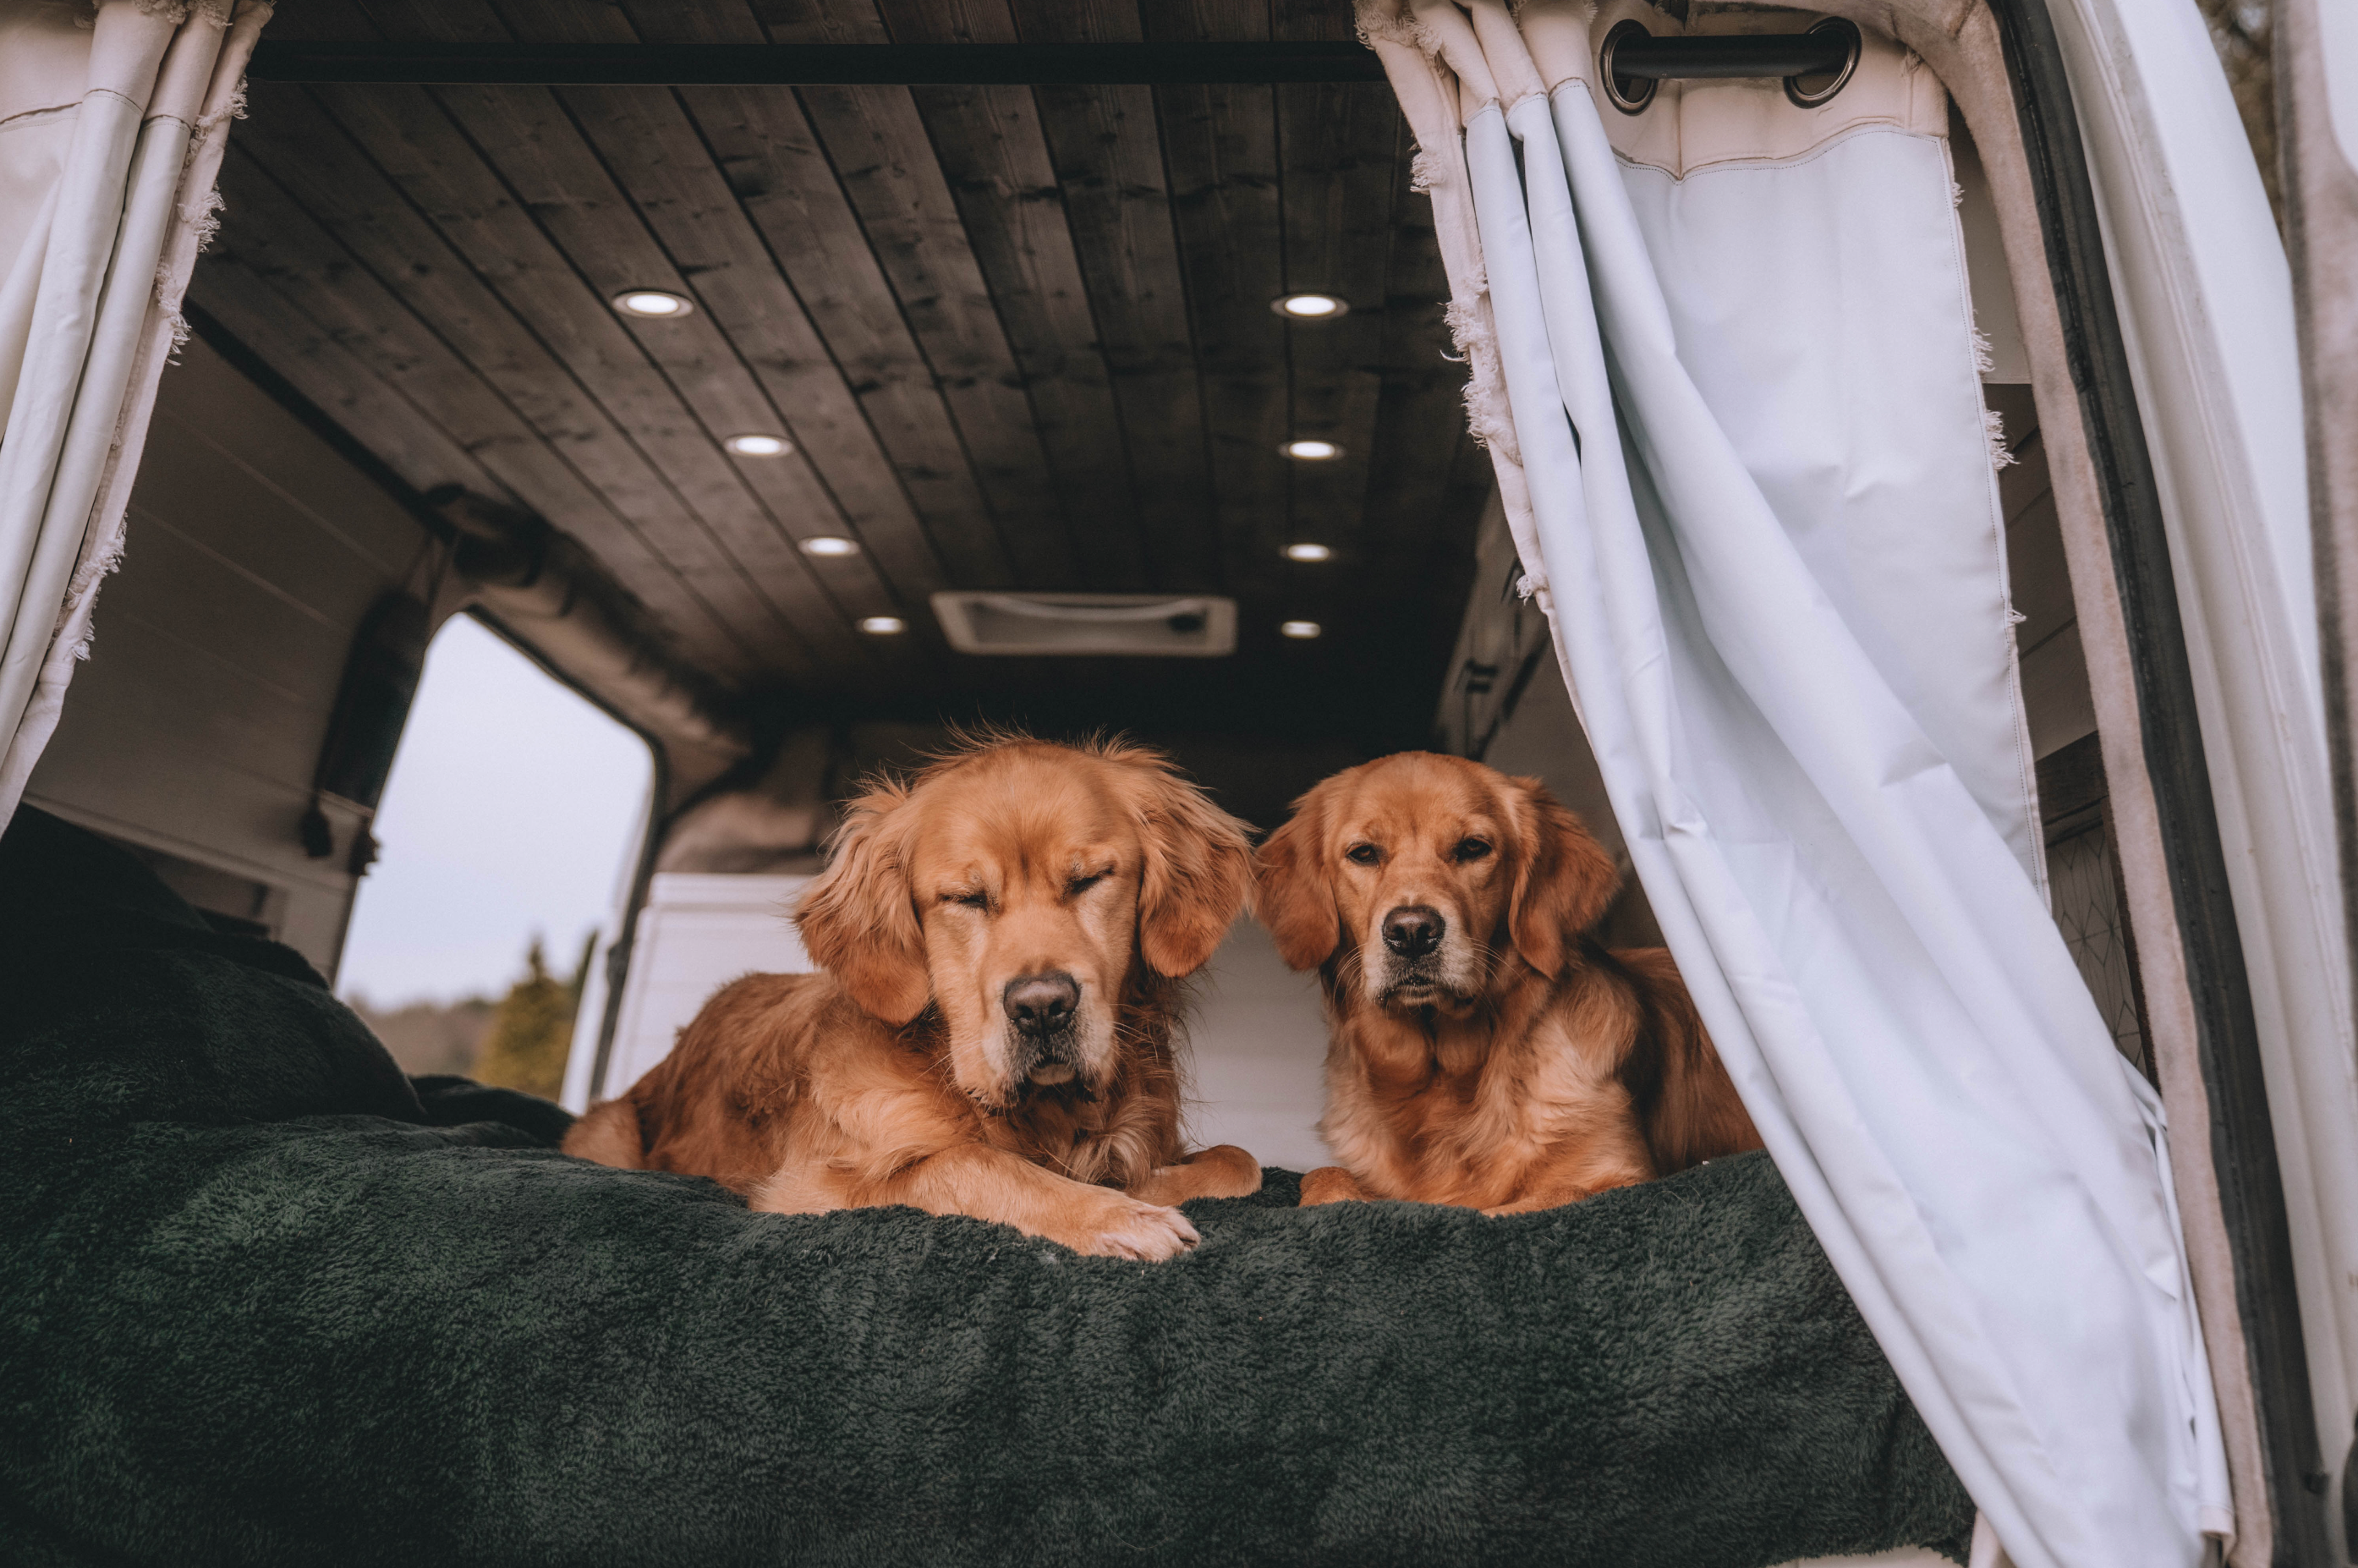 Two dogs sitting on a bed in a camper van